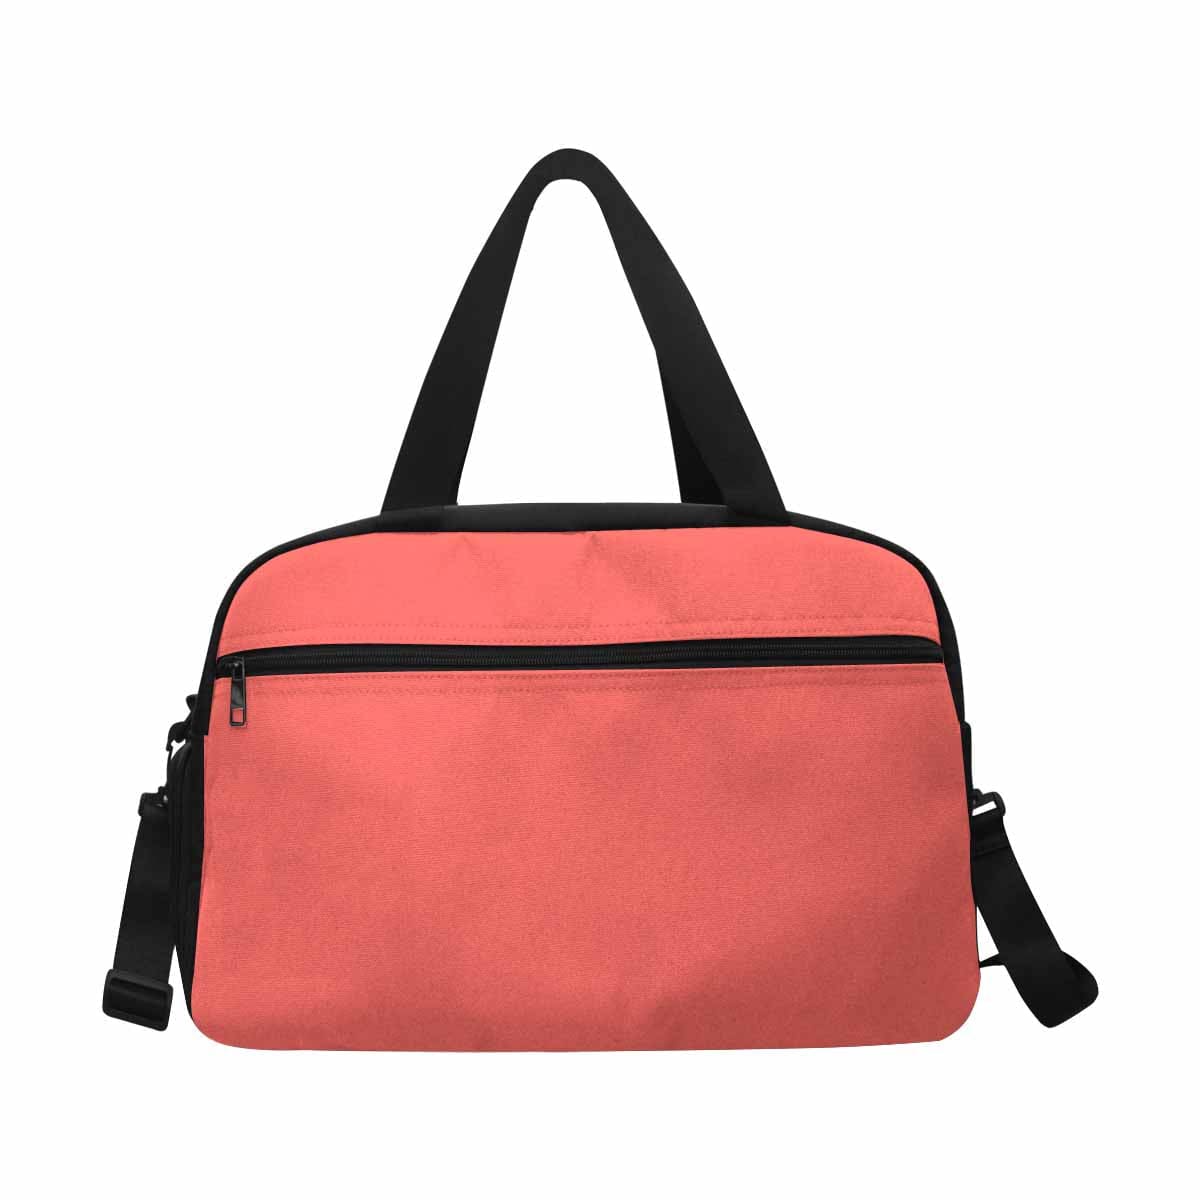 Pastel Red Tote And Crossbody Travel Bag - Bags | Travel Bags | Crossbody